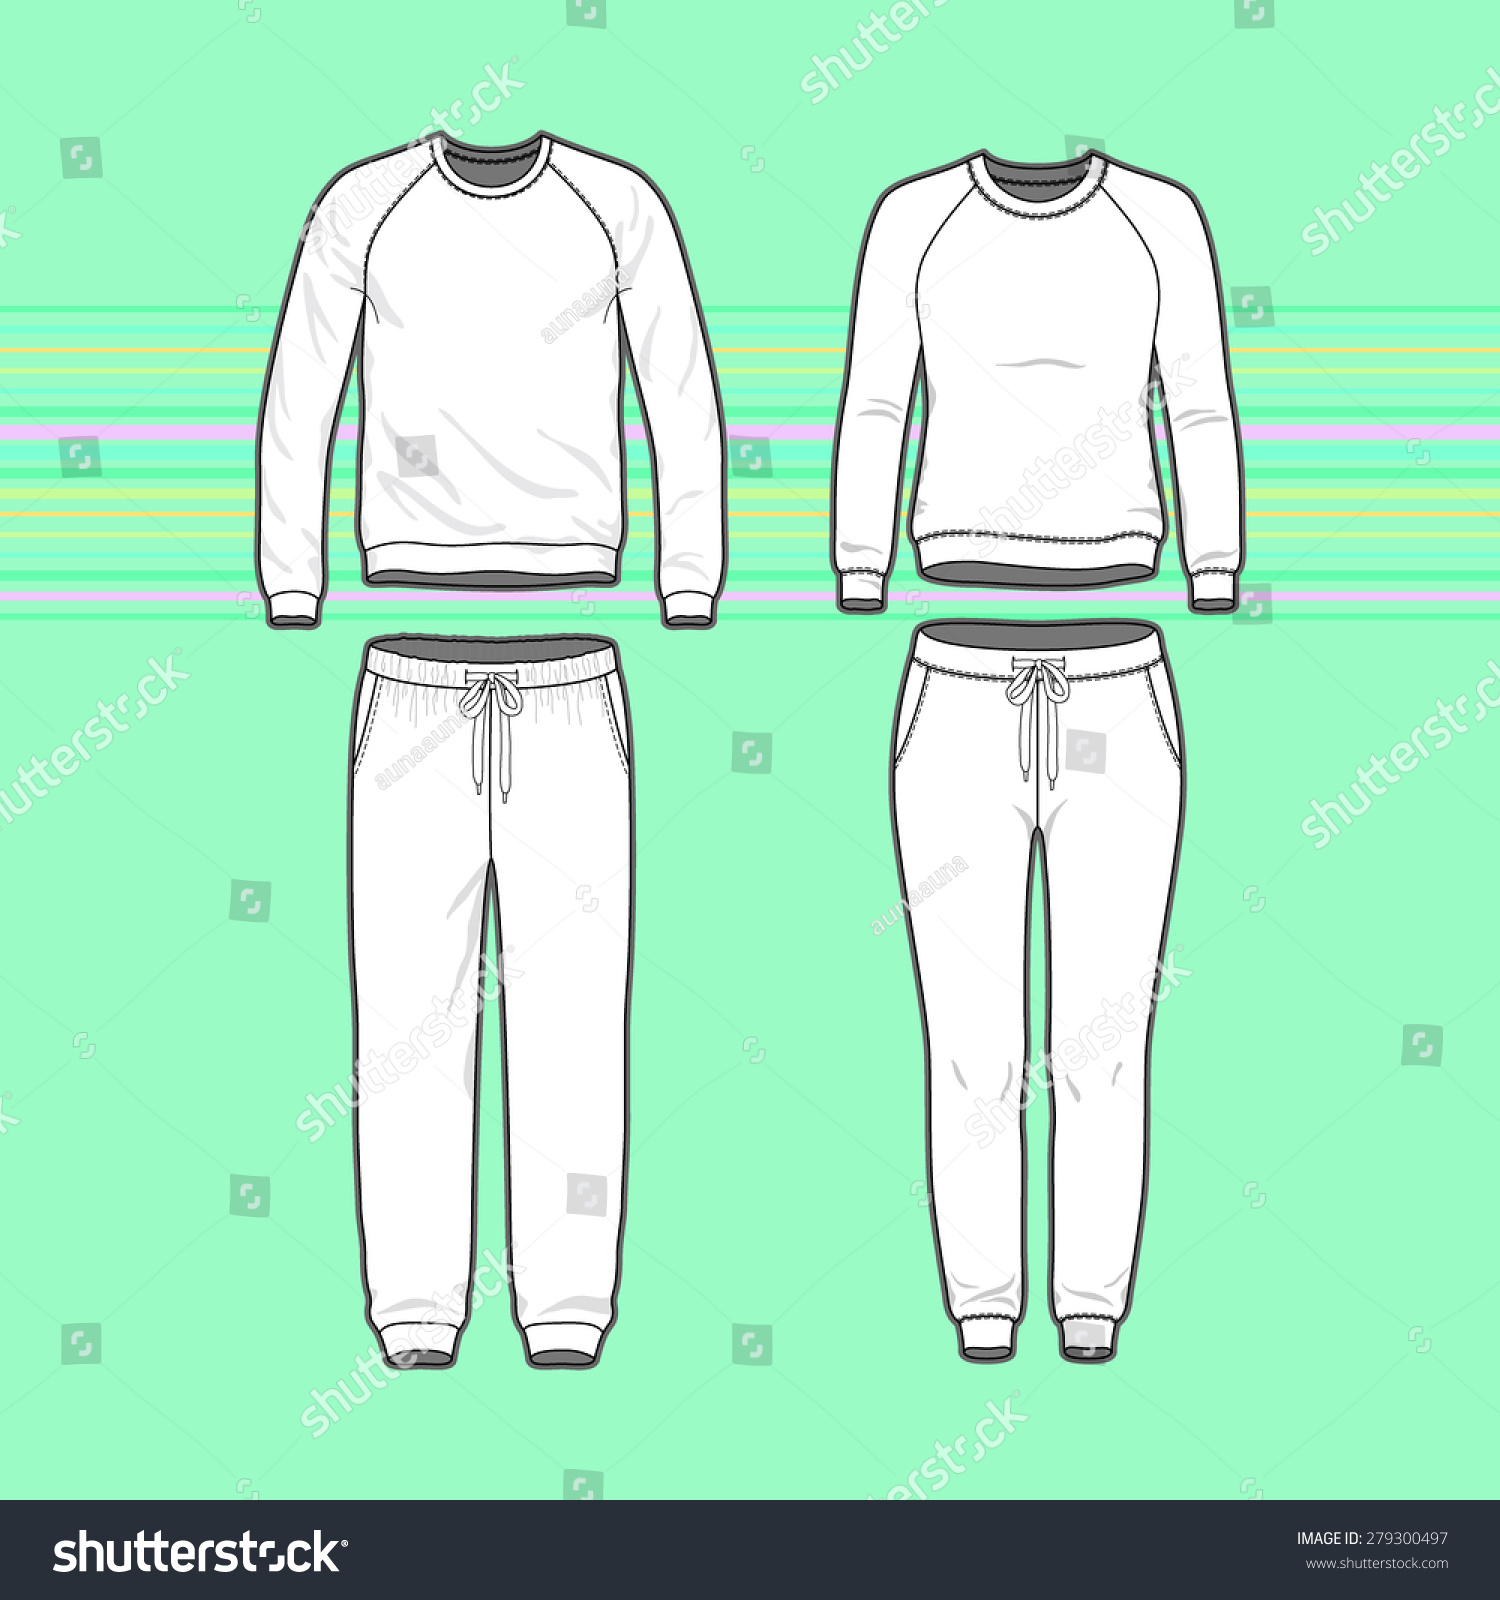 Front View Mens Womens Clothing Set Stock Vector 279300497 - Shutterstock